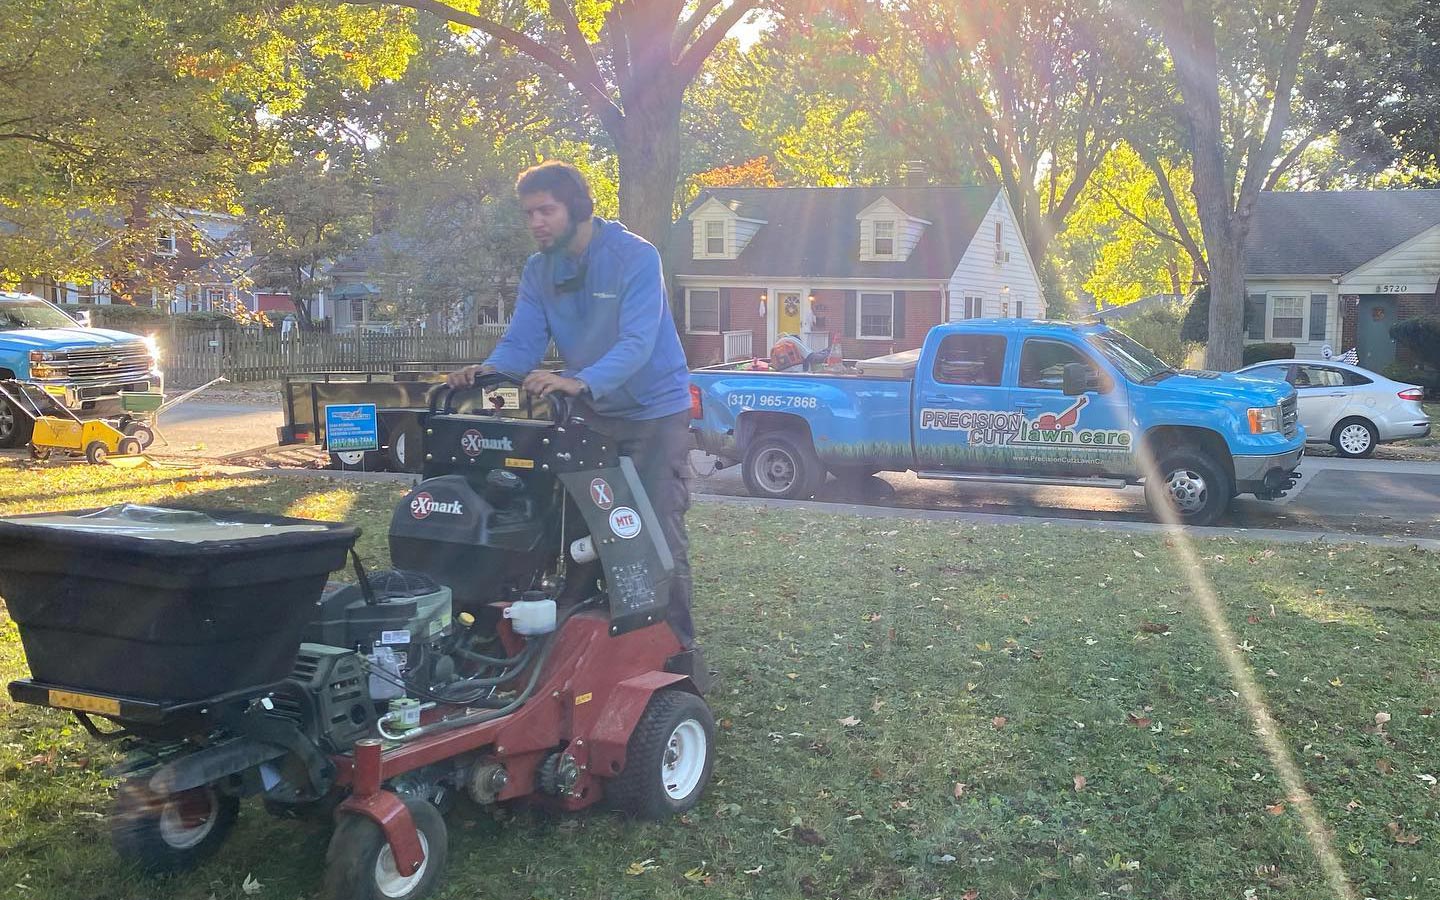 Precision Cutz Lawn Care employee and lawn machine in Zionsville, Indiana.